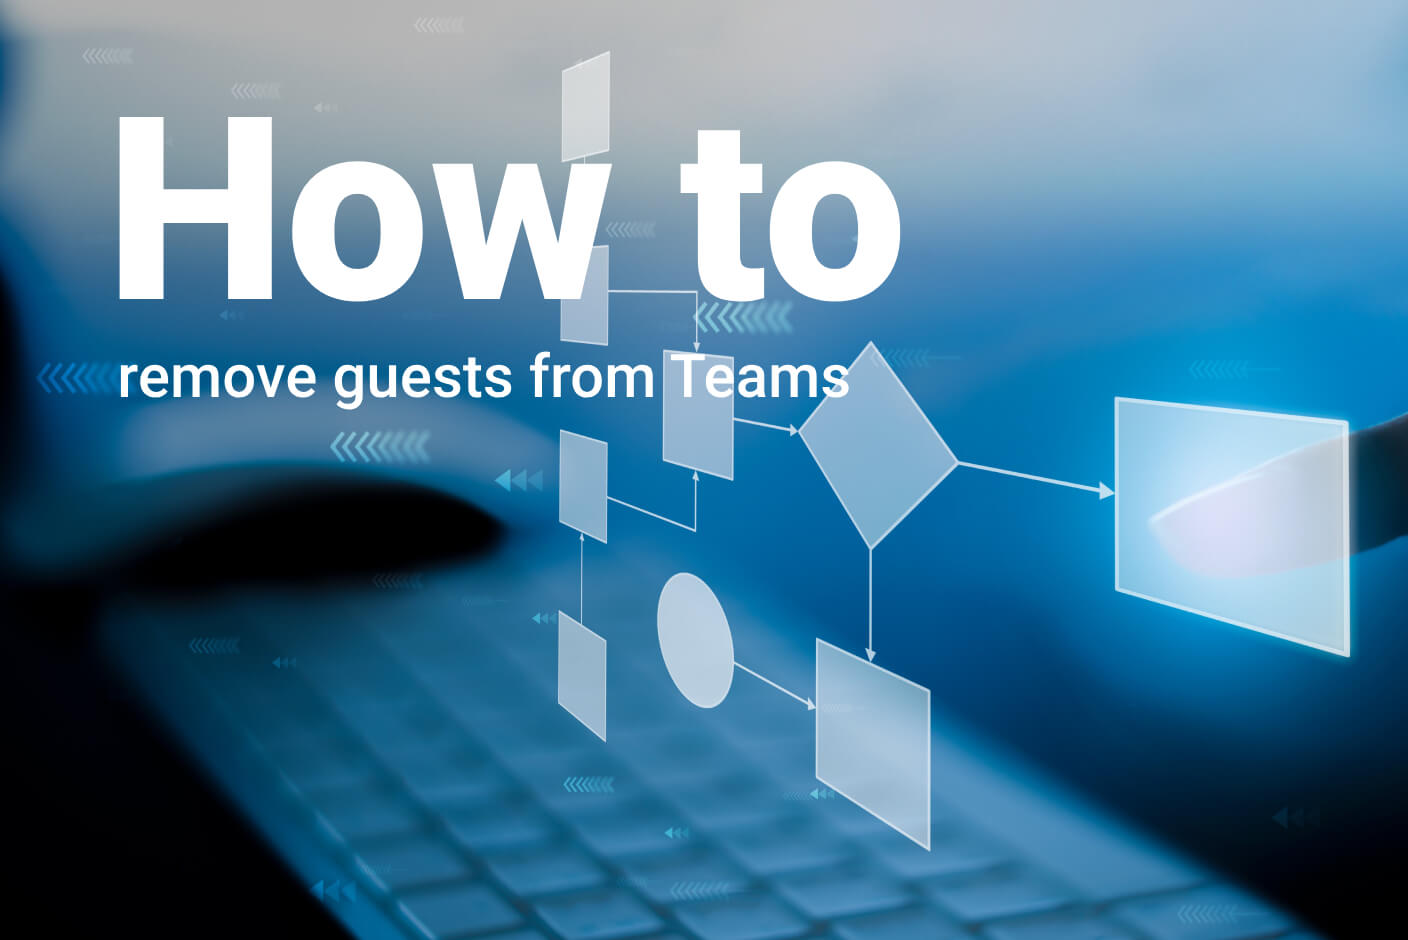 How to remove guests from Microsoft 365 Teams in one click